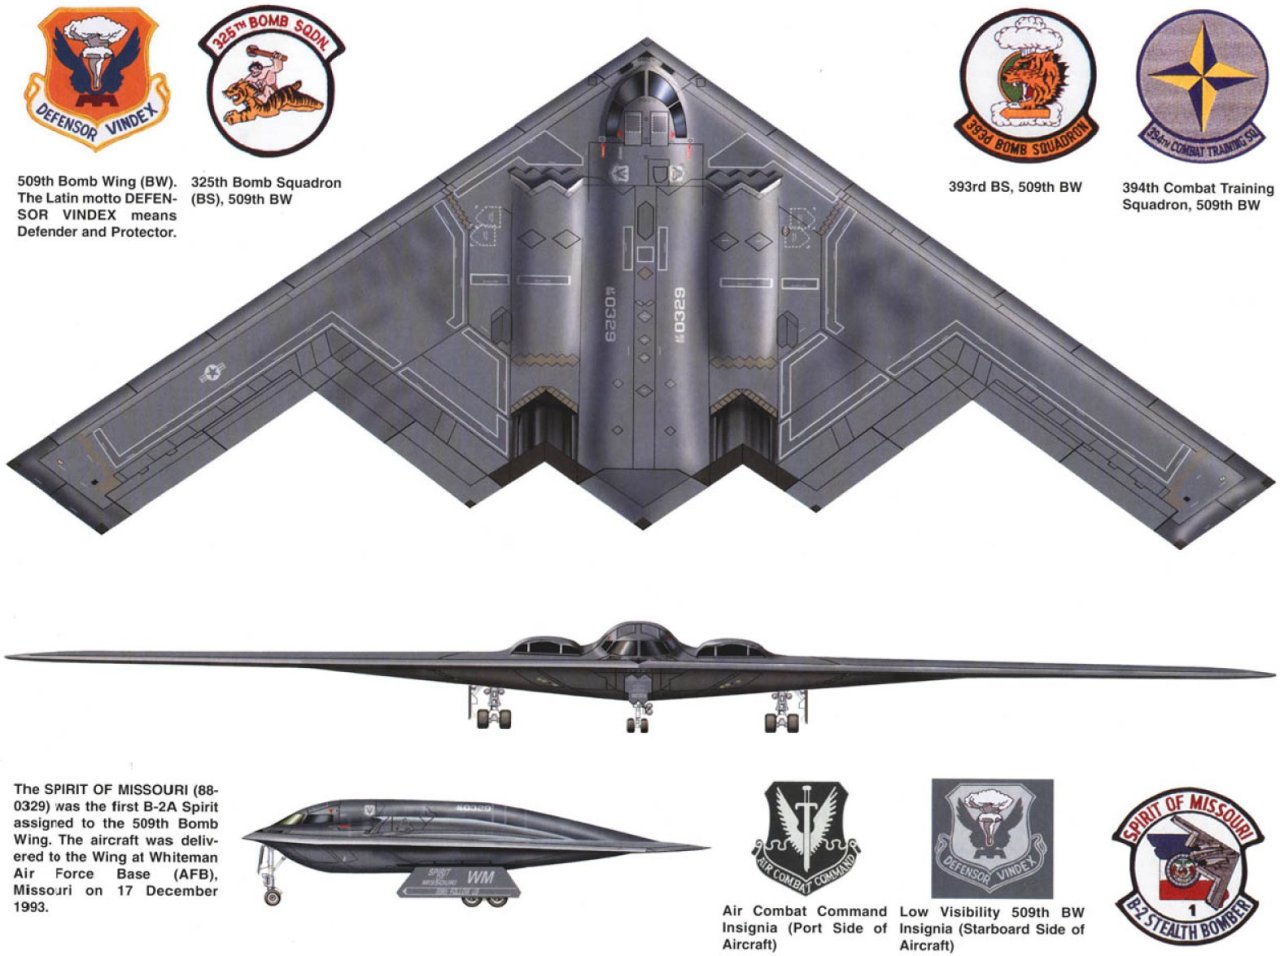 How the U.S. Air Force Could Make the New B-21 Stealth Bomber